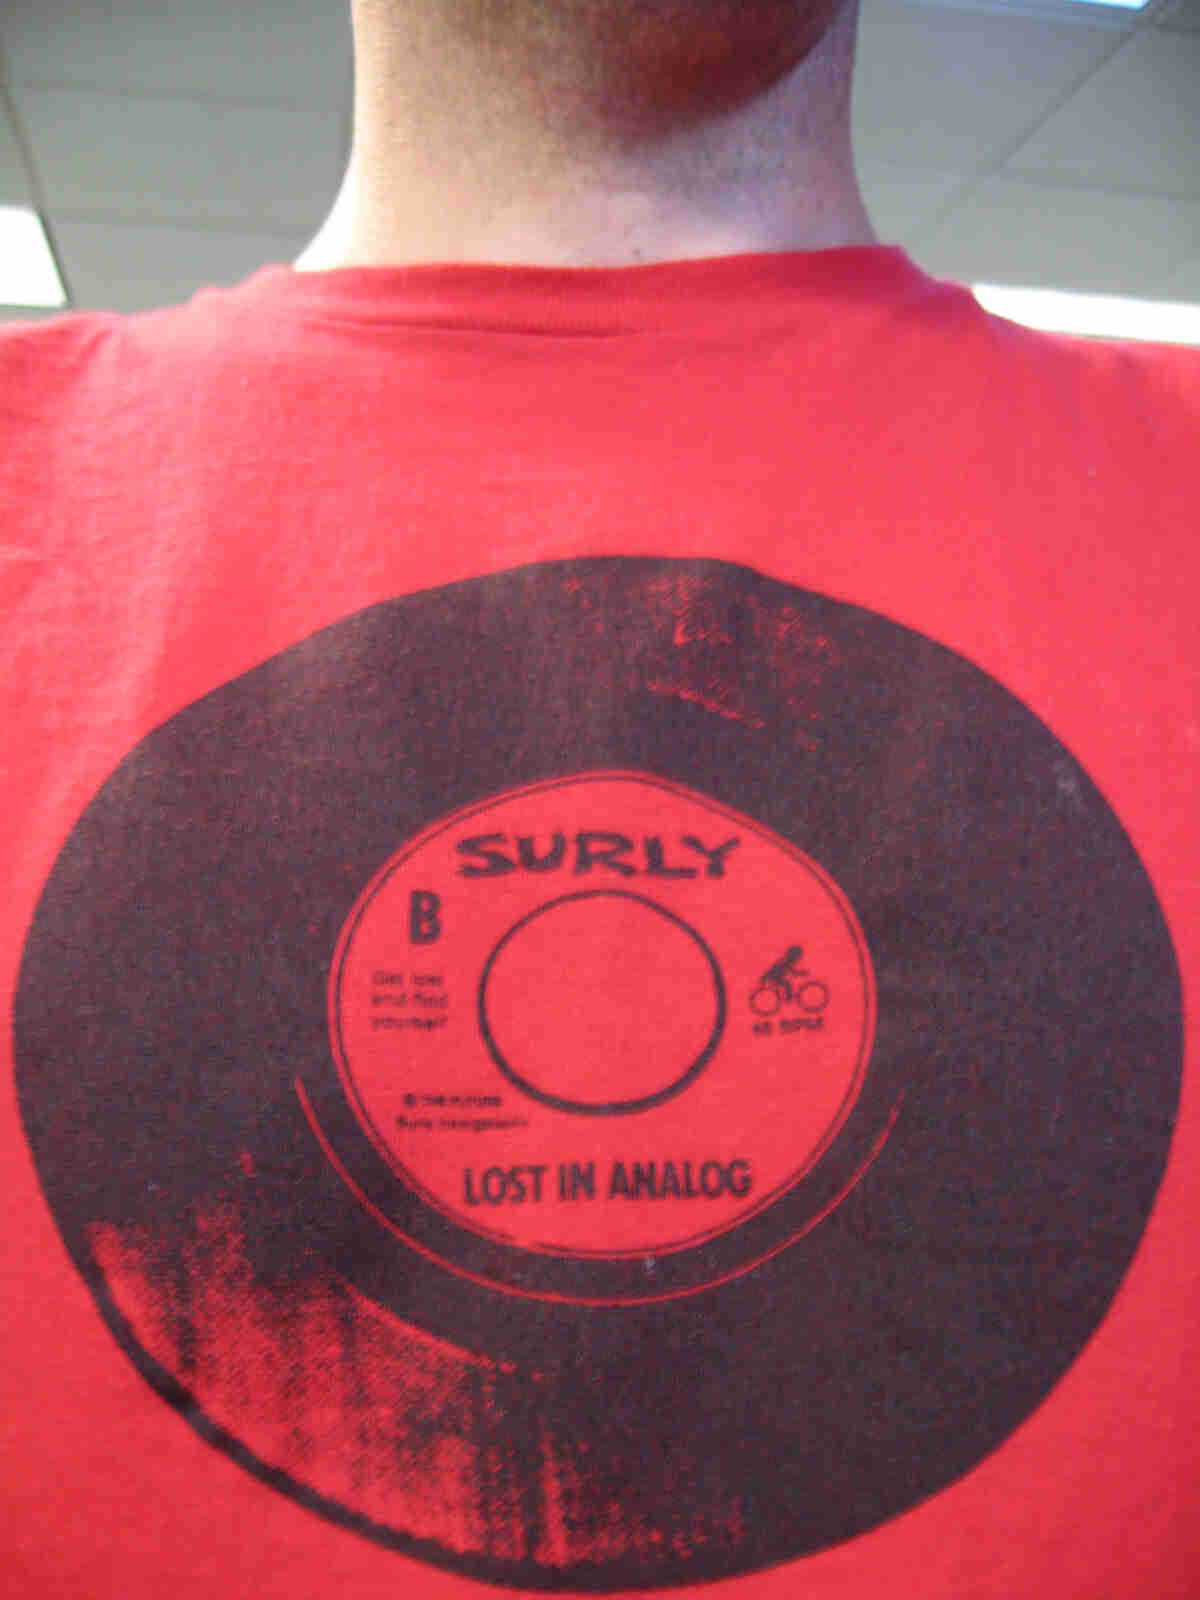 Front, chest area view of a person wearing a red Surly bike t-shirt with a black record album graphic, in an office